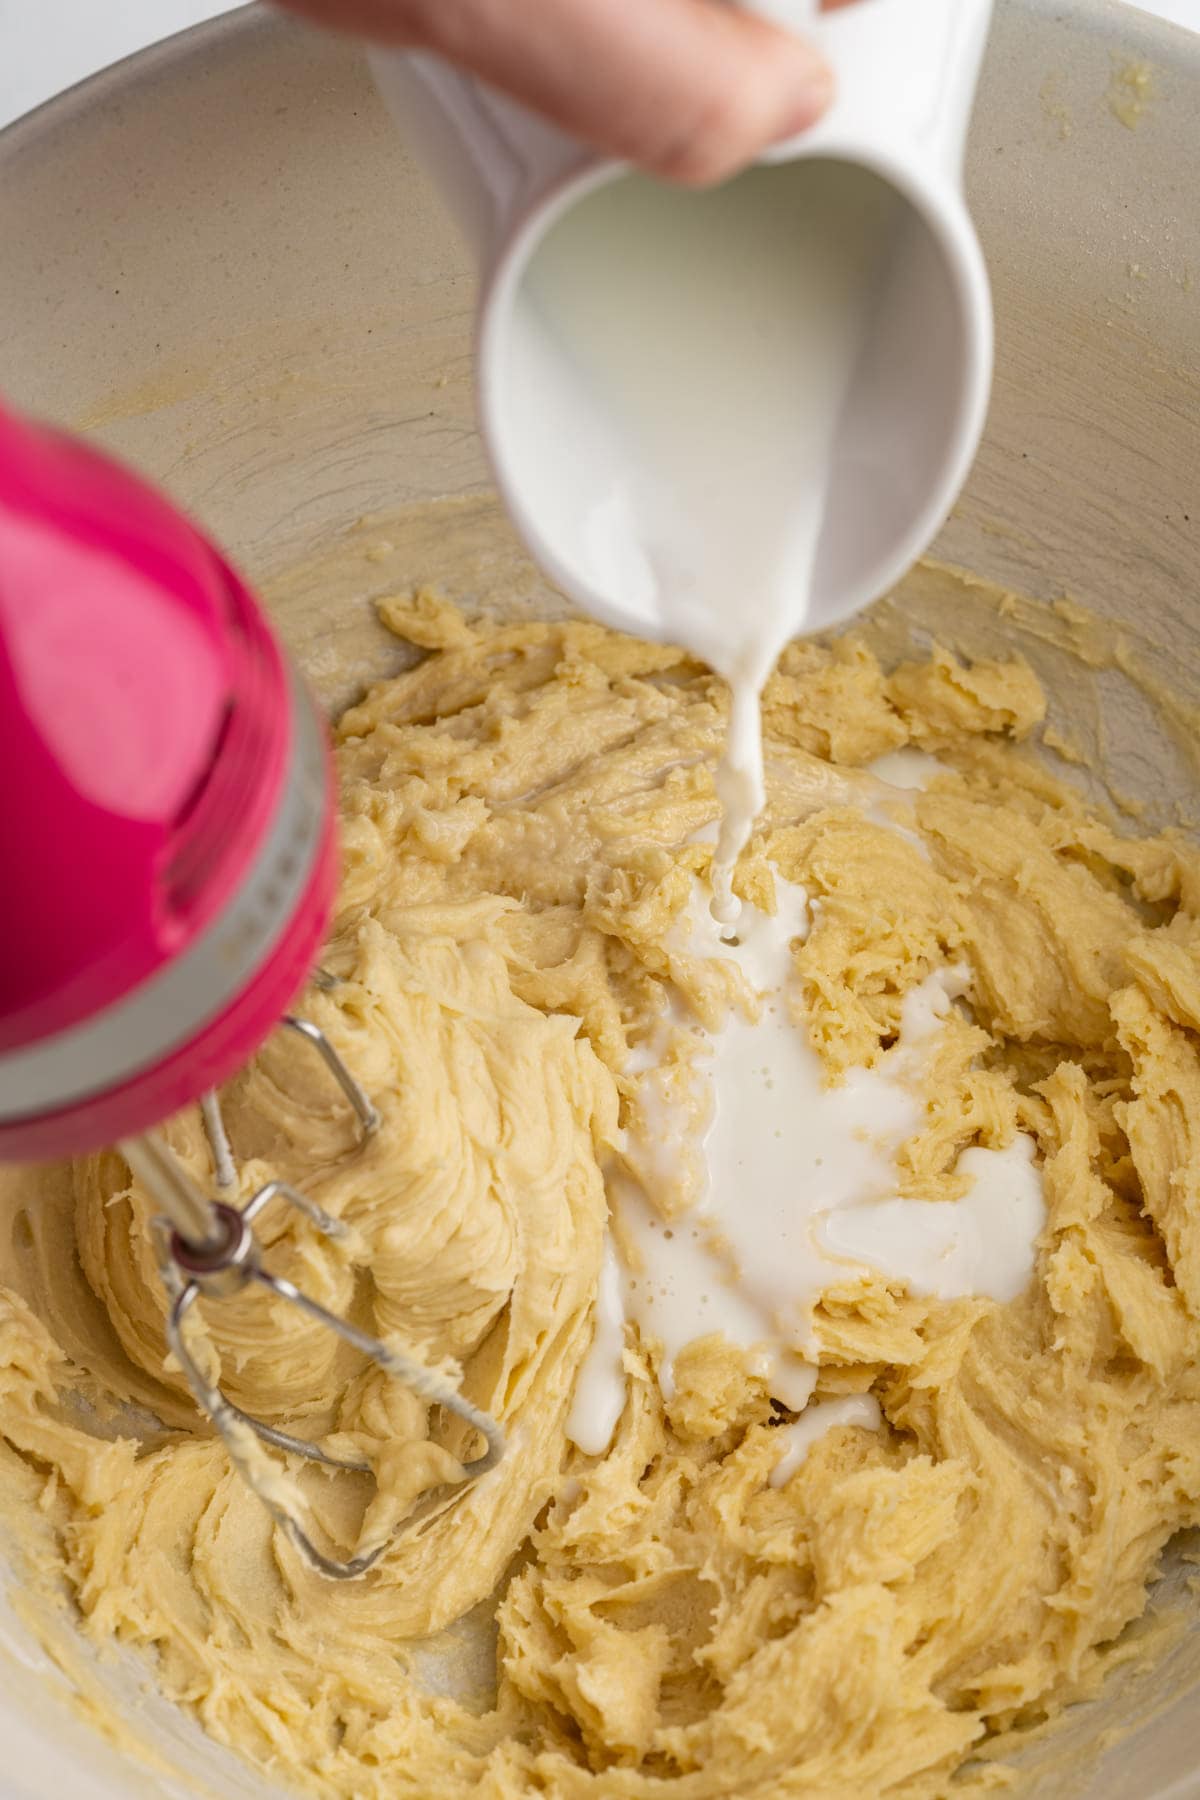 Adding milk to loaf cake batter while hand mixer is on